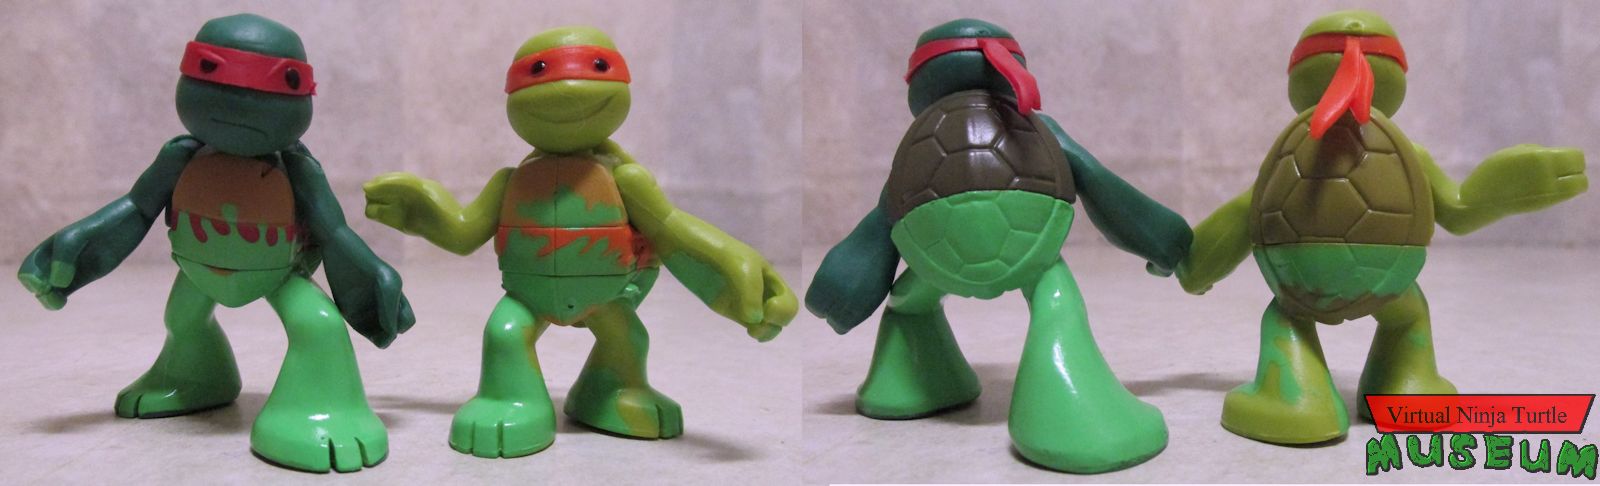 Rookies in Training Mikey & Raph front and back